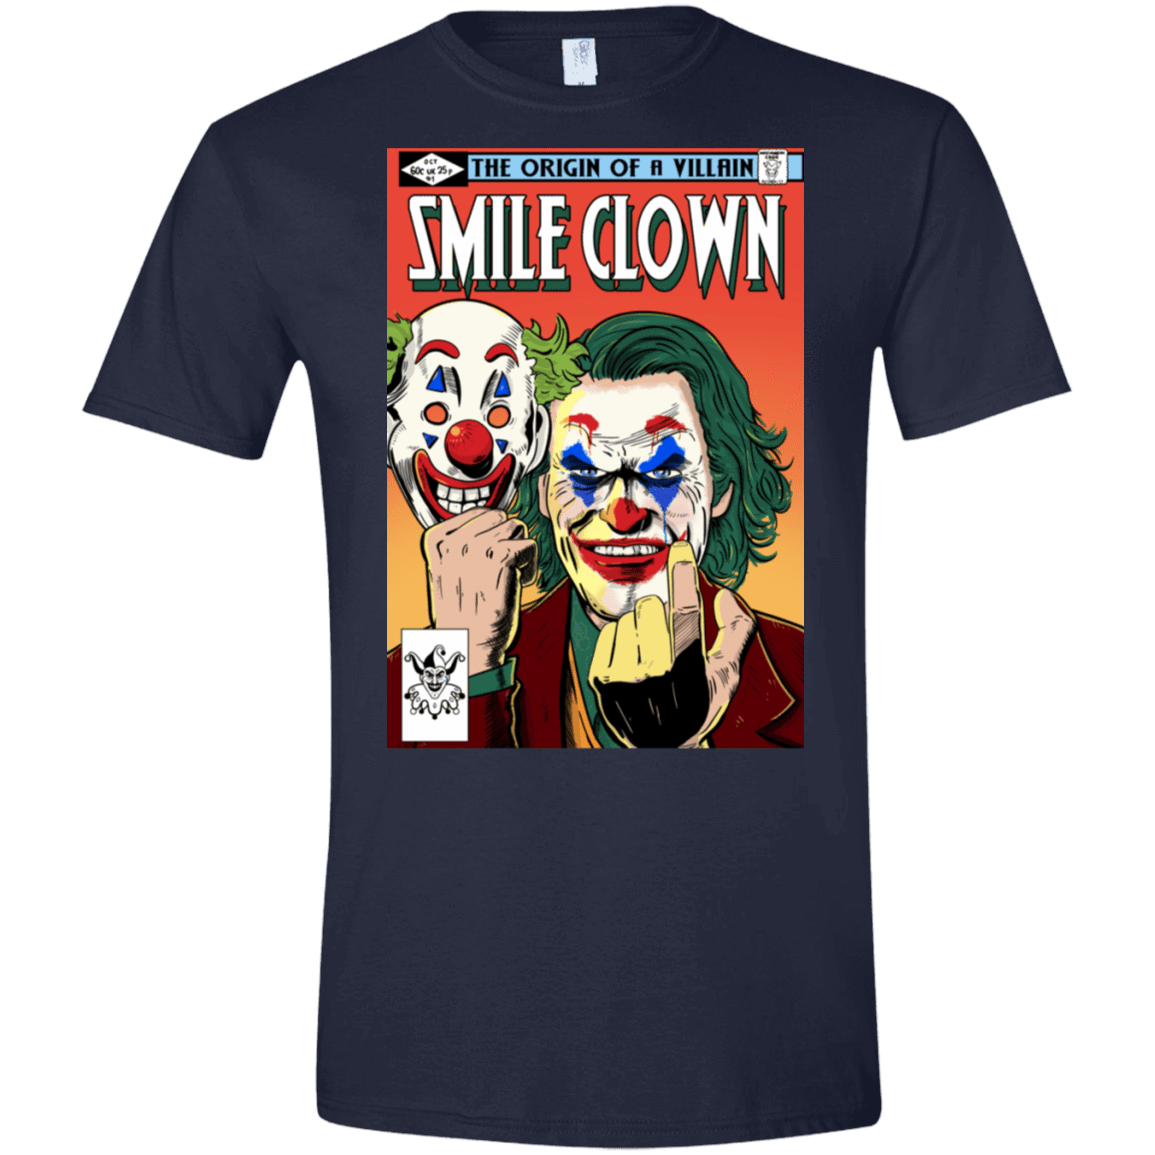 T-Shirts Navy / S Smile Clown Men's Semi-Fitted Softstyle